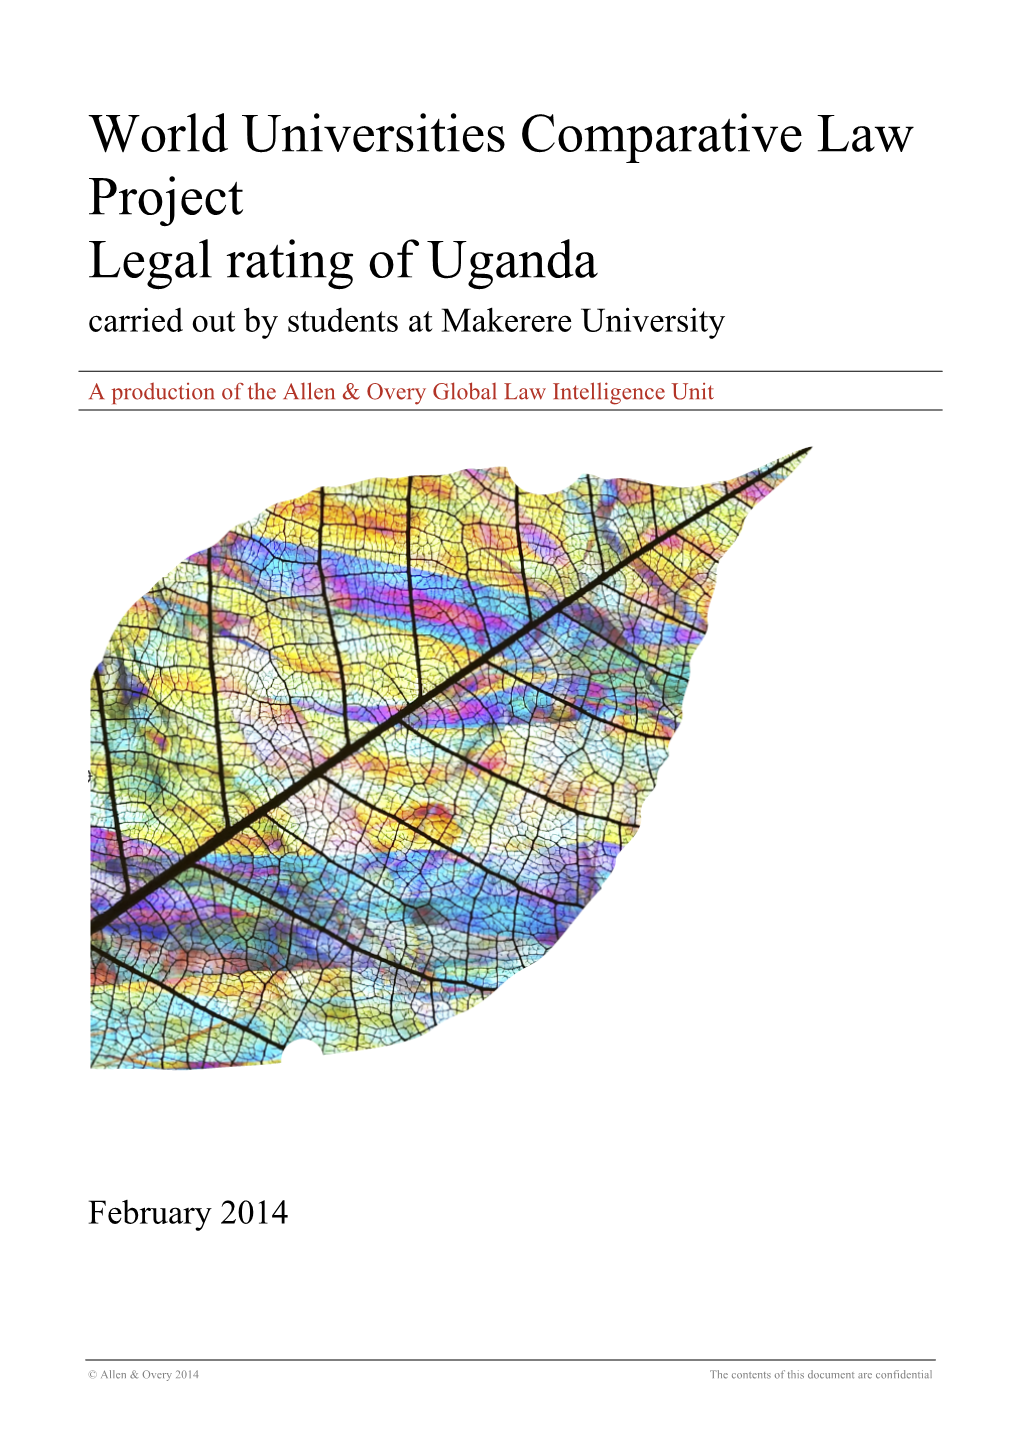 World Universities Comparative Law Project Legal Rating of Uganda Carried out by Students at Makerere University